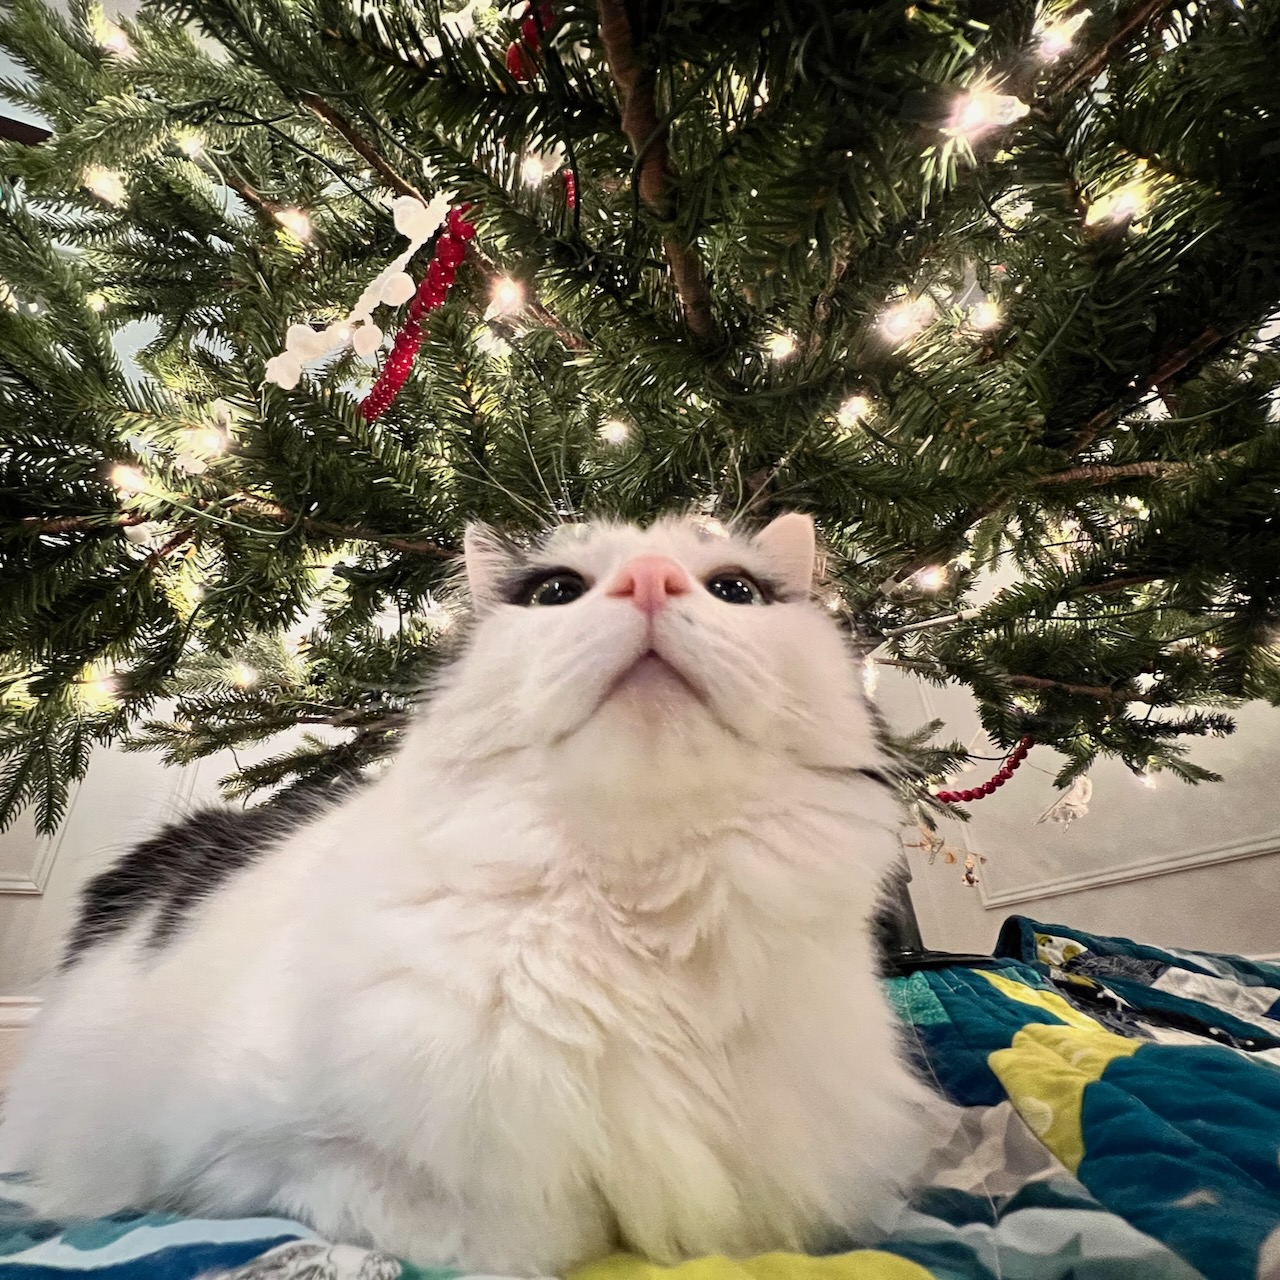 Maggie under the Christmas tree